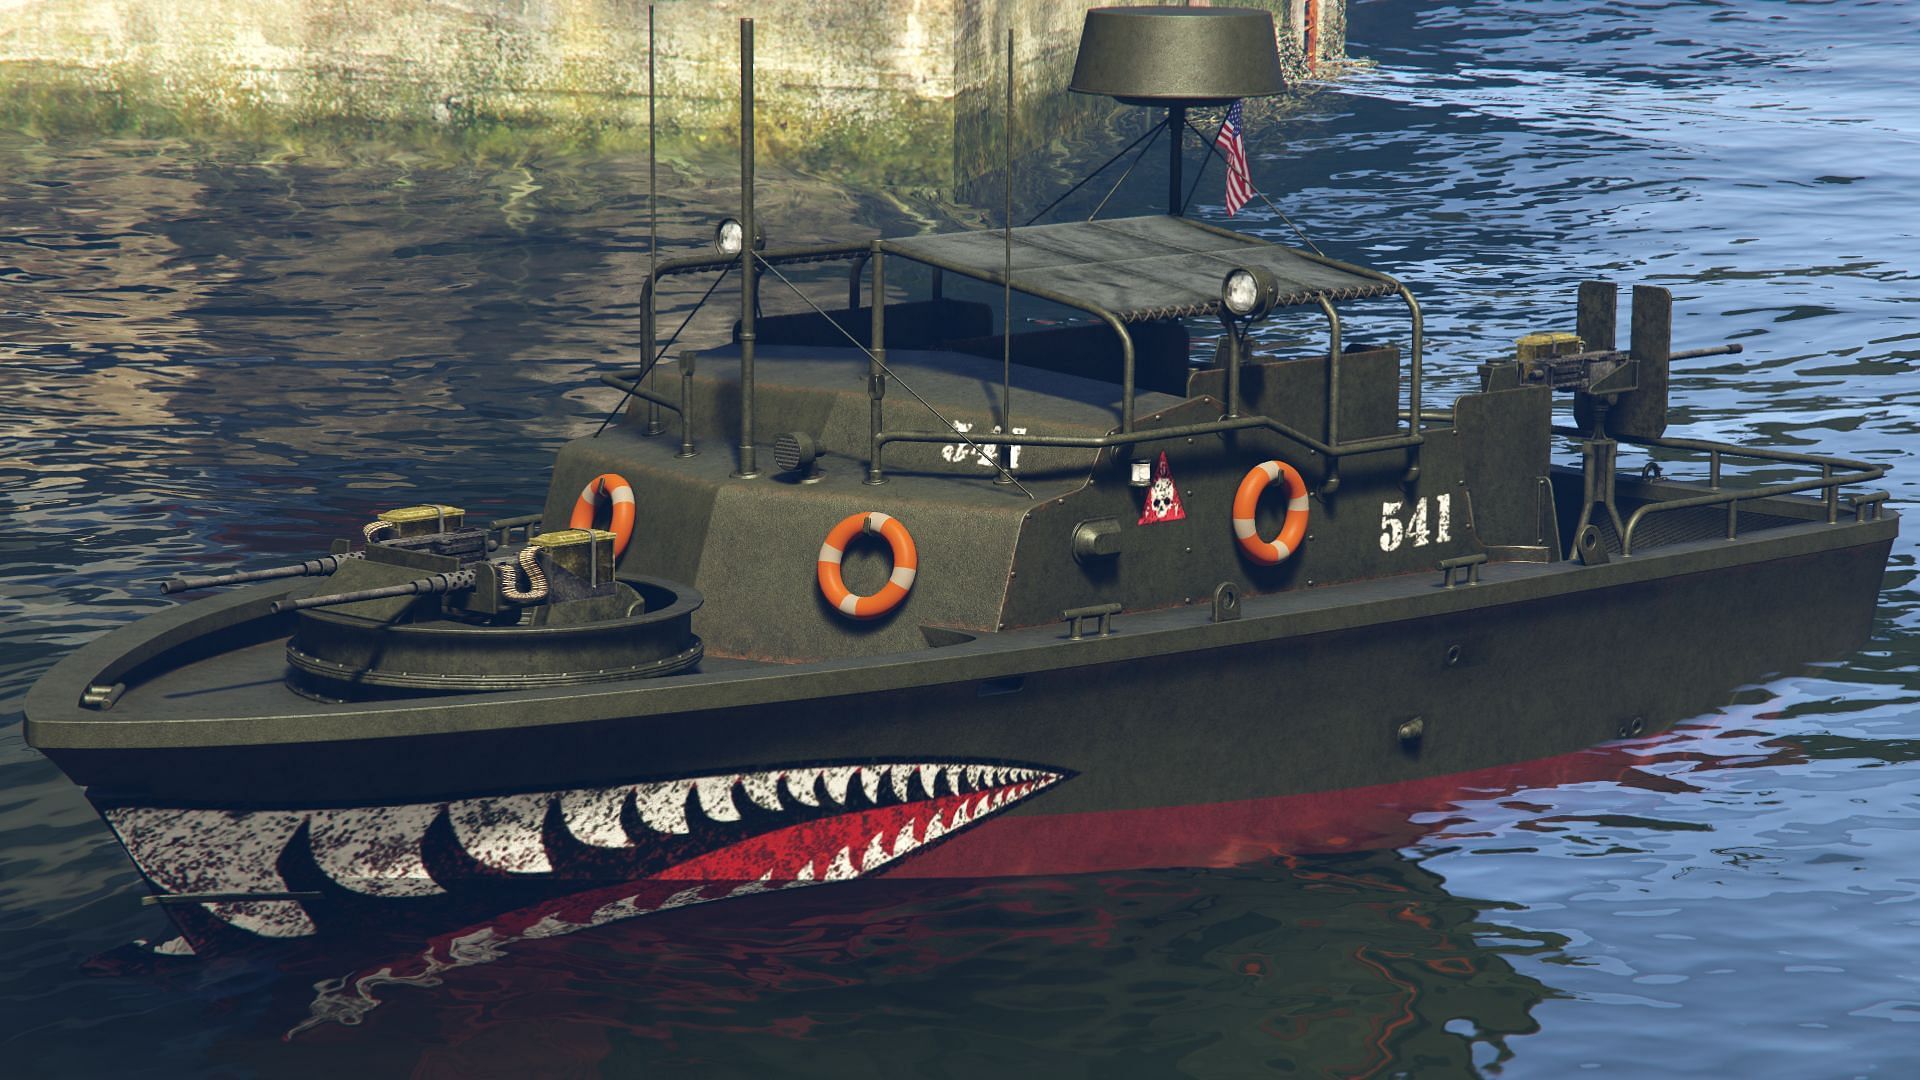 Boats are generally terrible investments in GTA Online (Image via Rockstar Games)